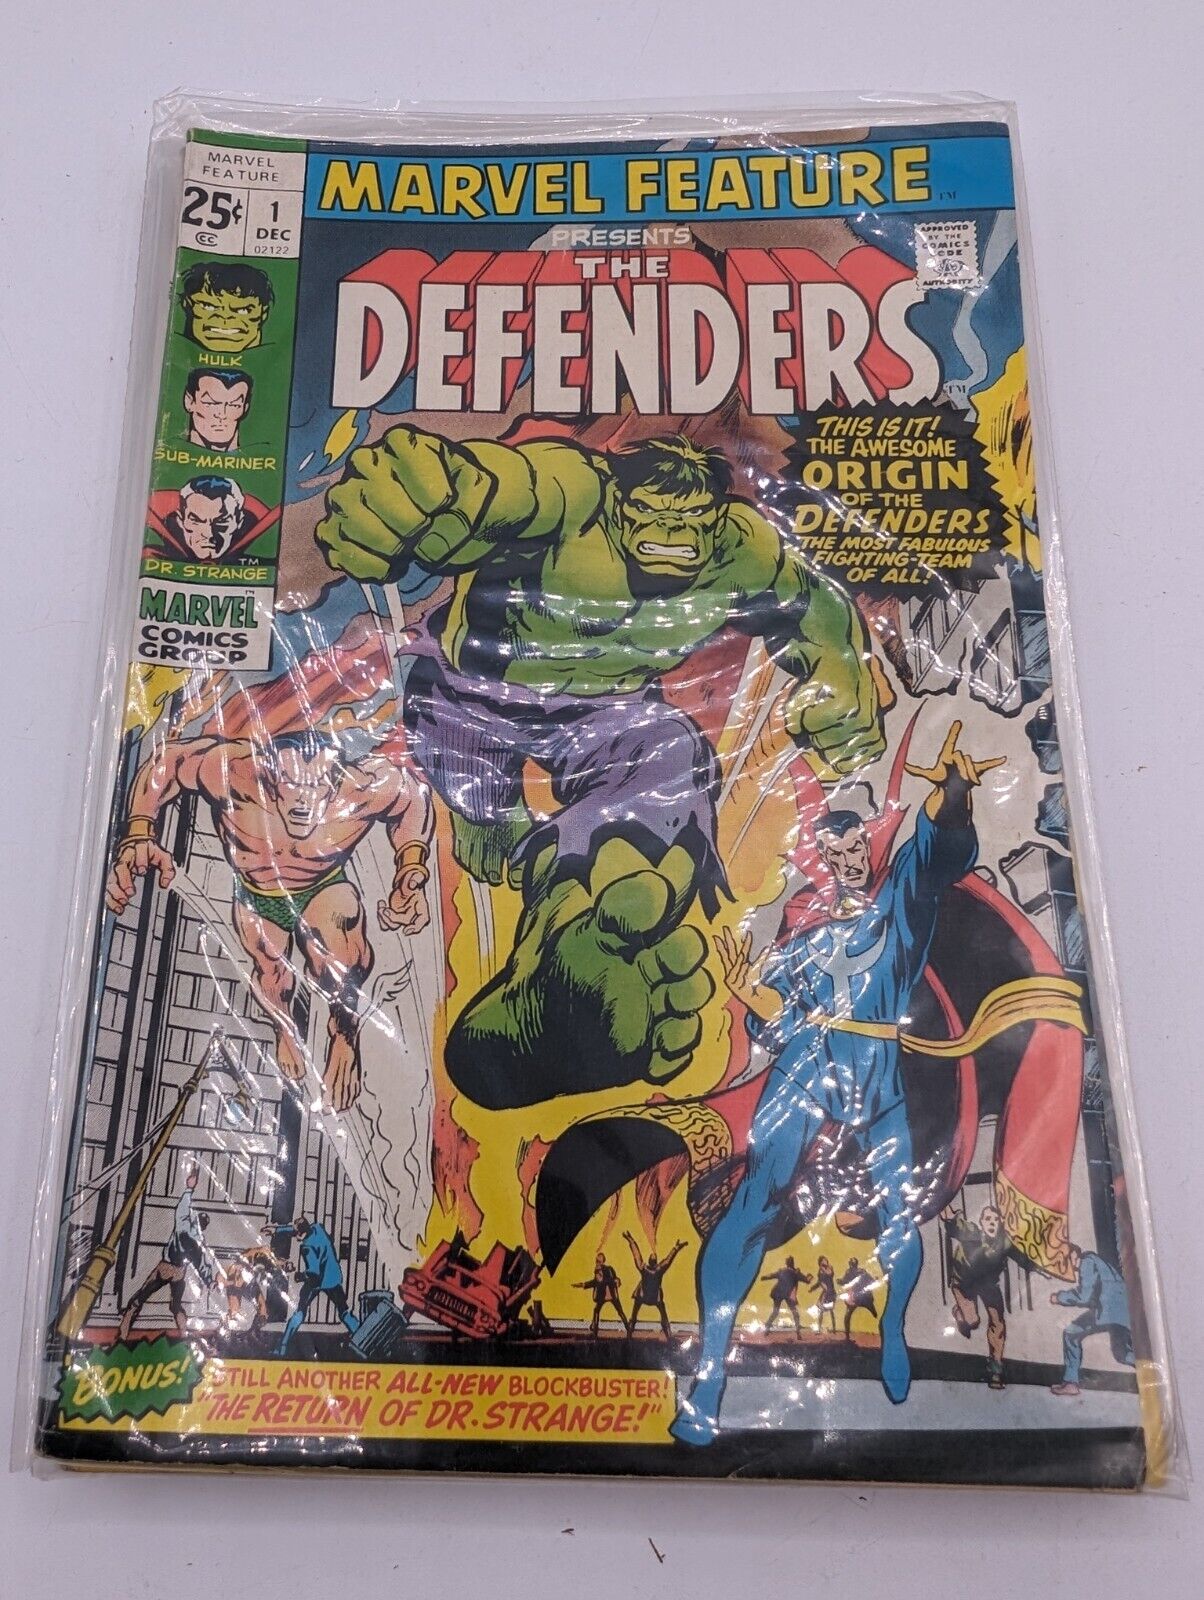 Marvel Feature #1 The Defenders (1971) - 1st Appearance of Defenders